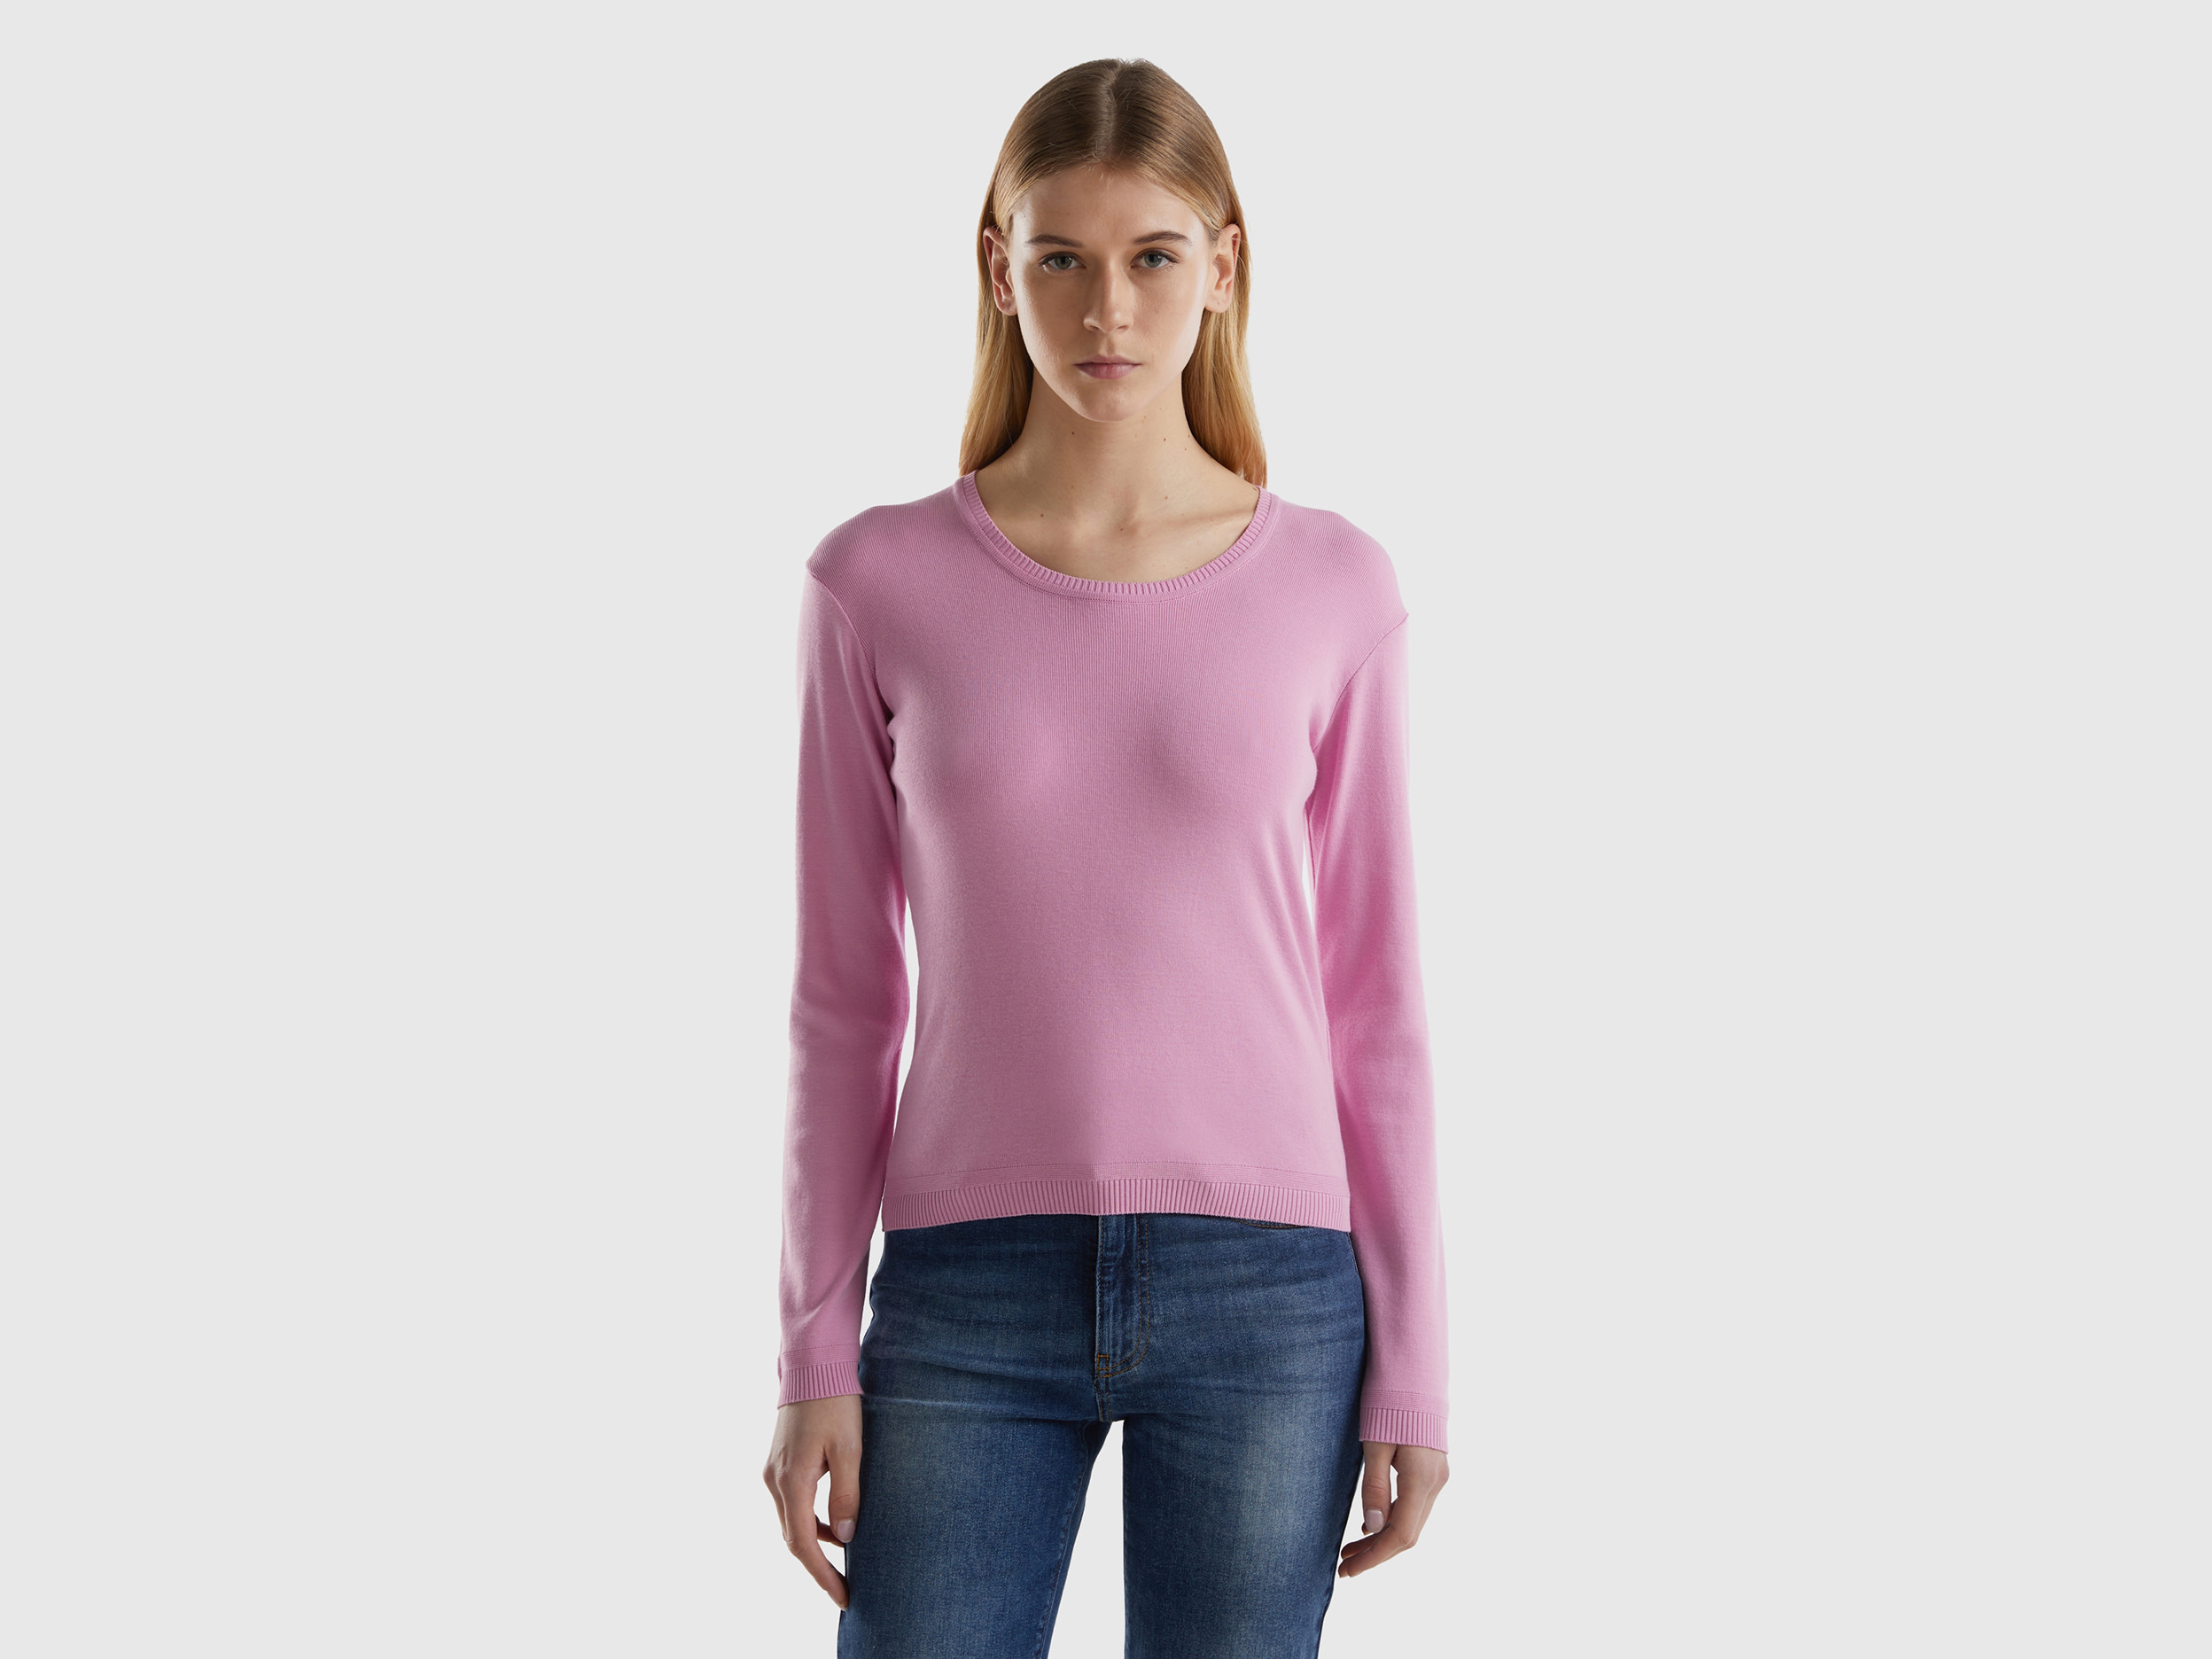 Benetton, Crew Neck Sweater In Pure Cotton, size S, Pastel Pink, Women